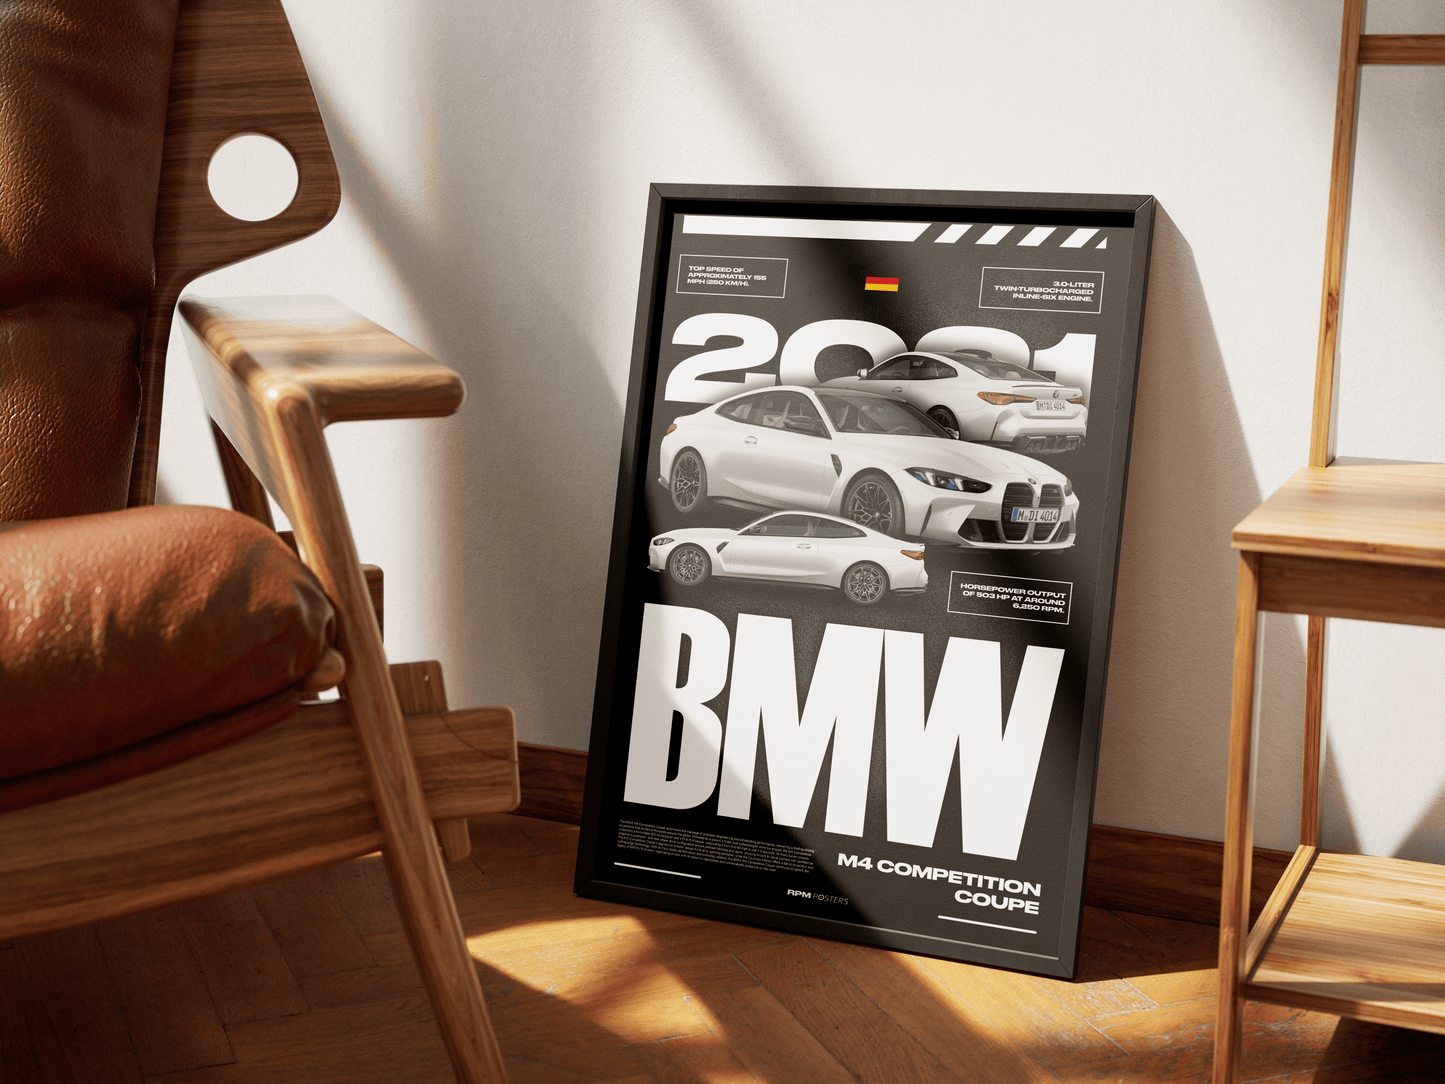 BMW M4 COMPETITION COUPE POSTER